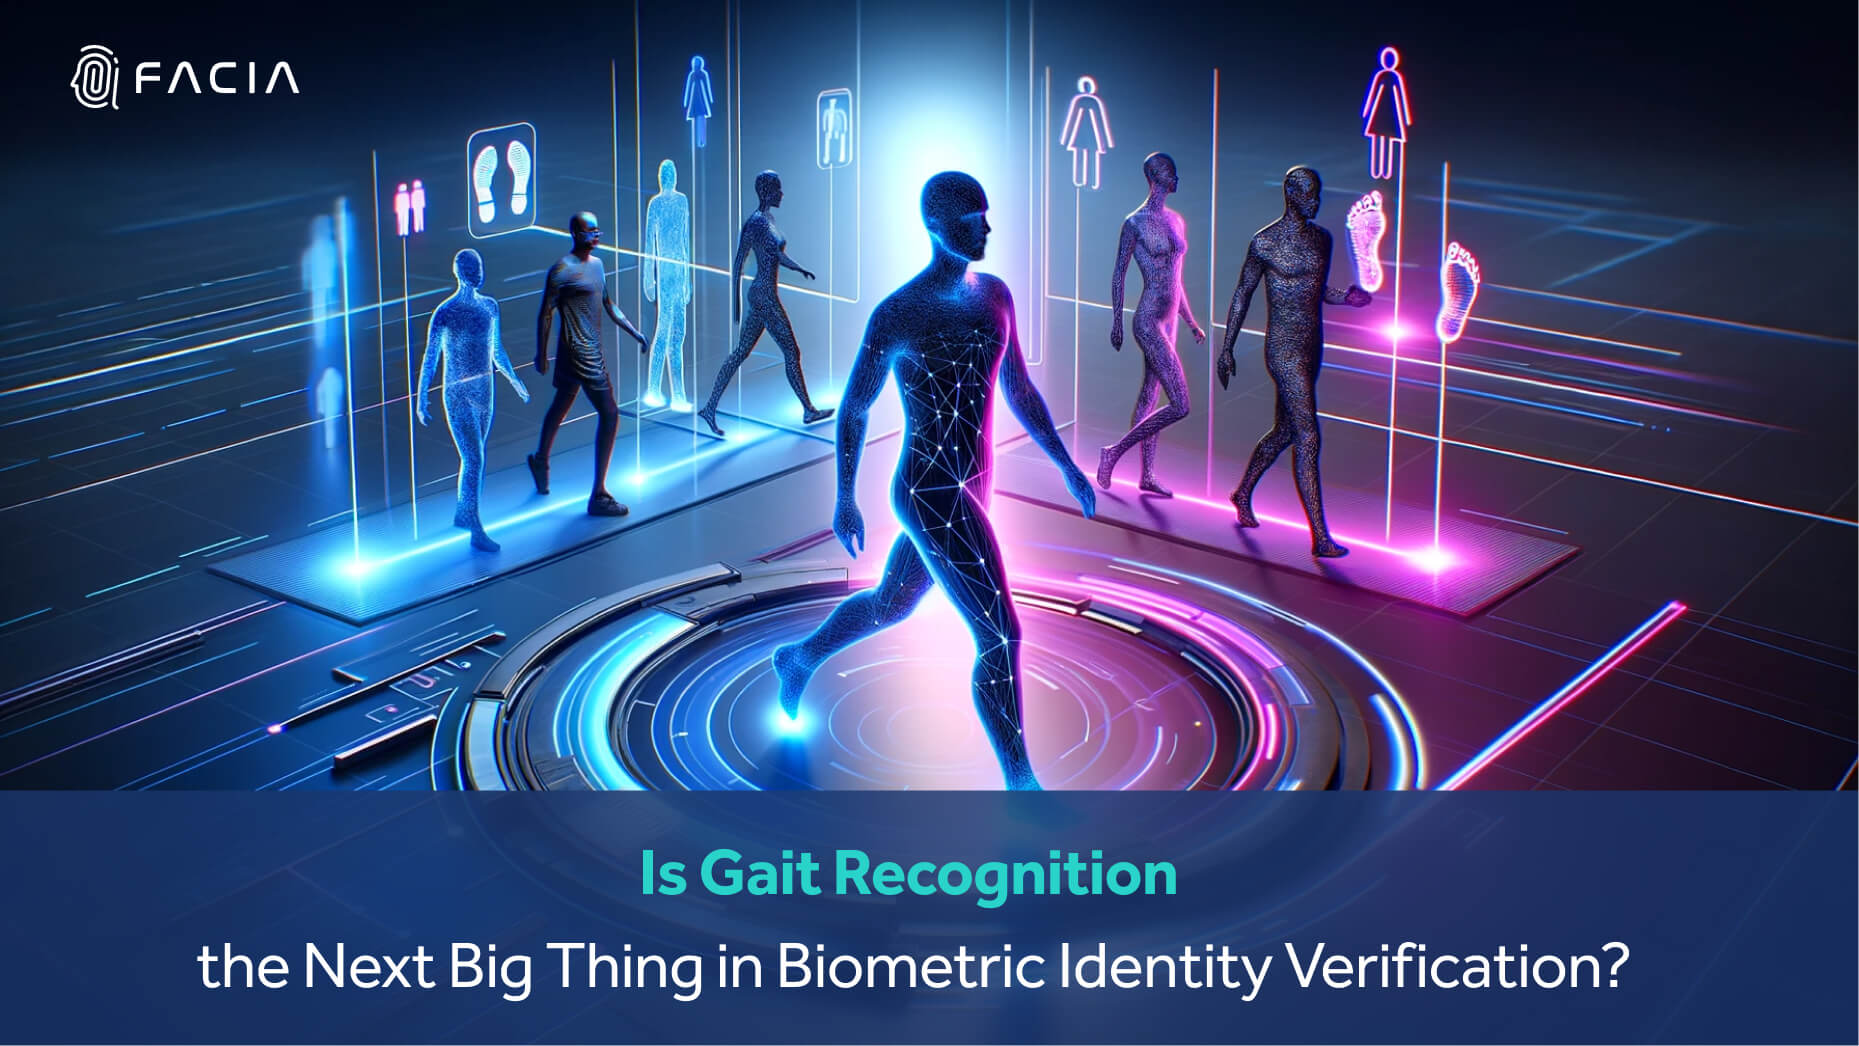 The banner image for a blog on gait recognition being a highly precise and accurate biometric identity verification trait